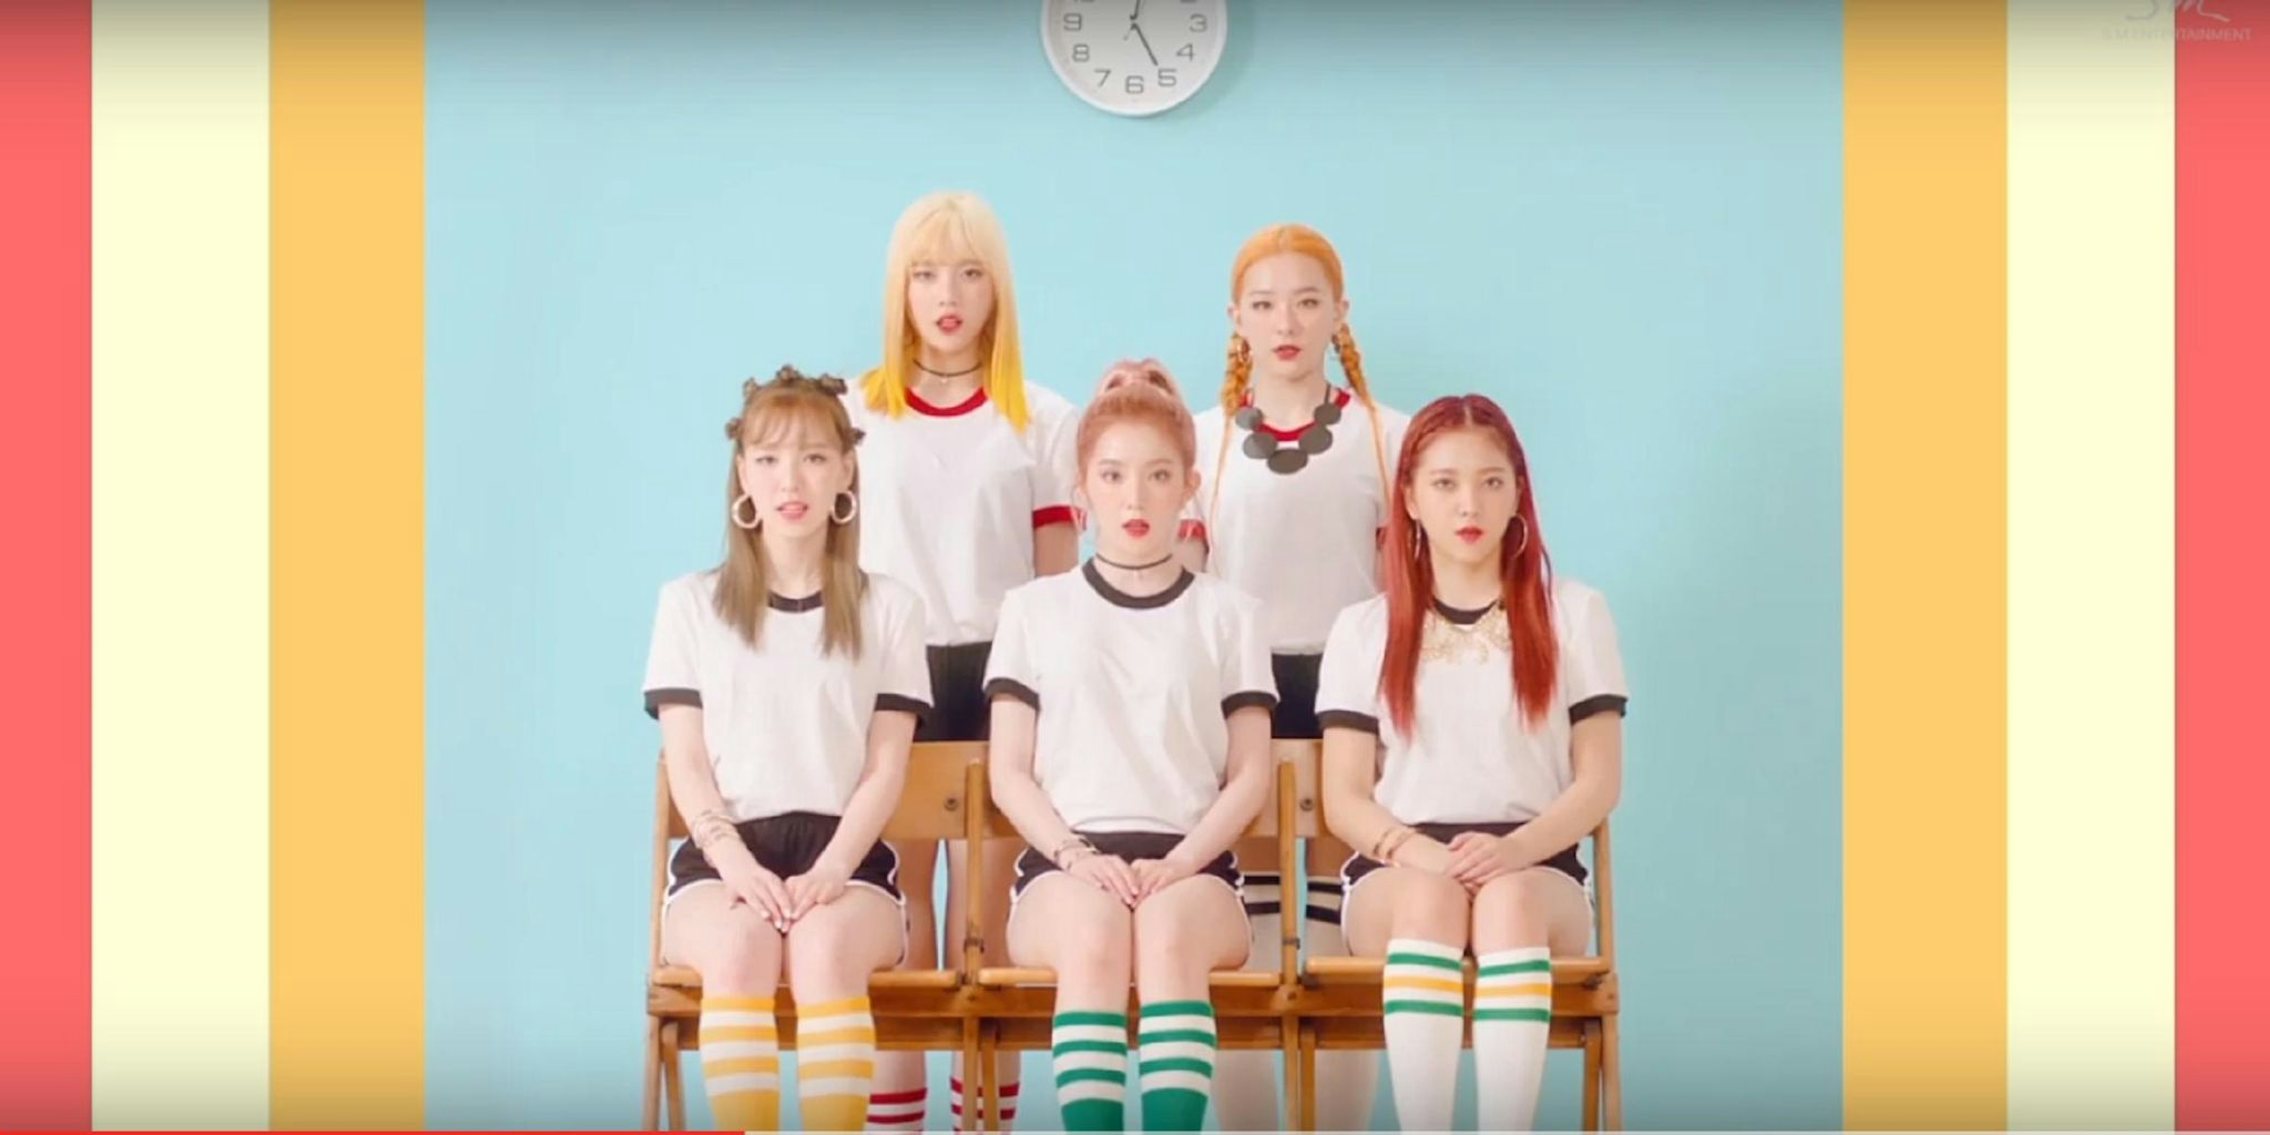 Red Velvet's New Song 'Russian Roulette' Is Cute and Dangerous